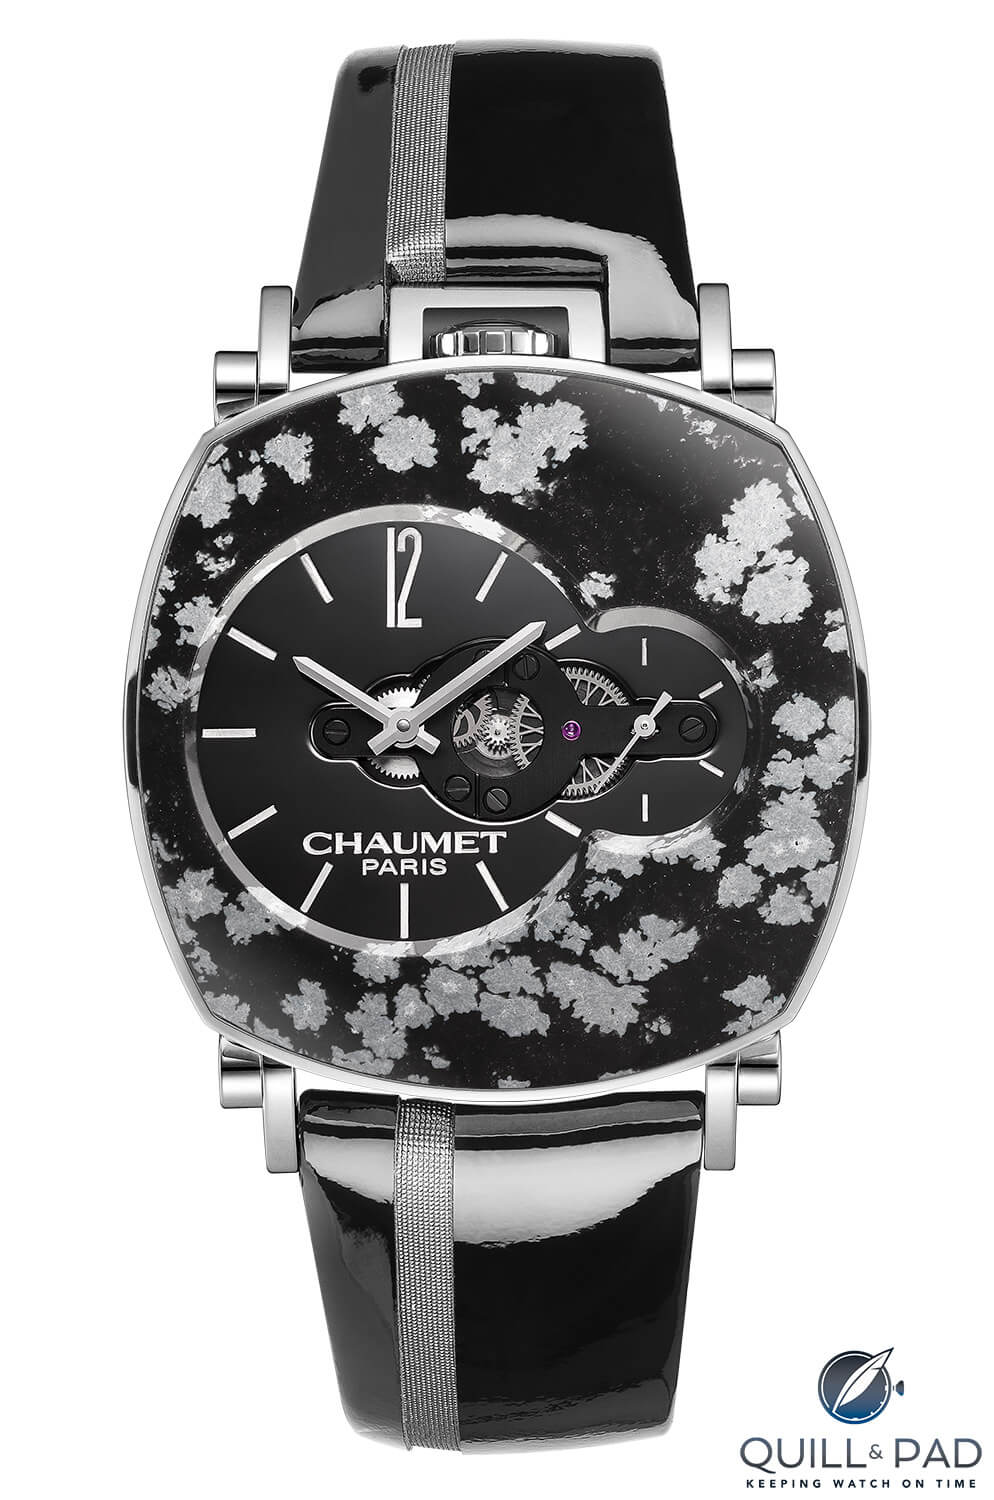 It's all in the name: the Chaumet Dandy Arty